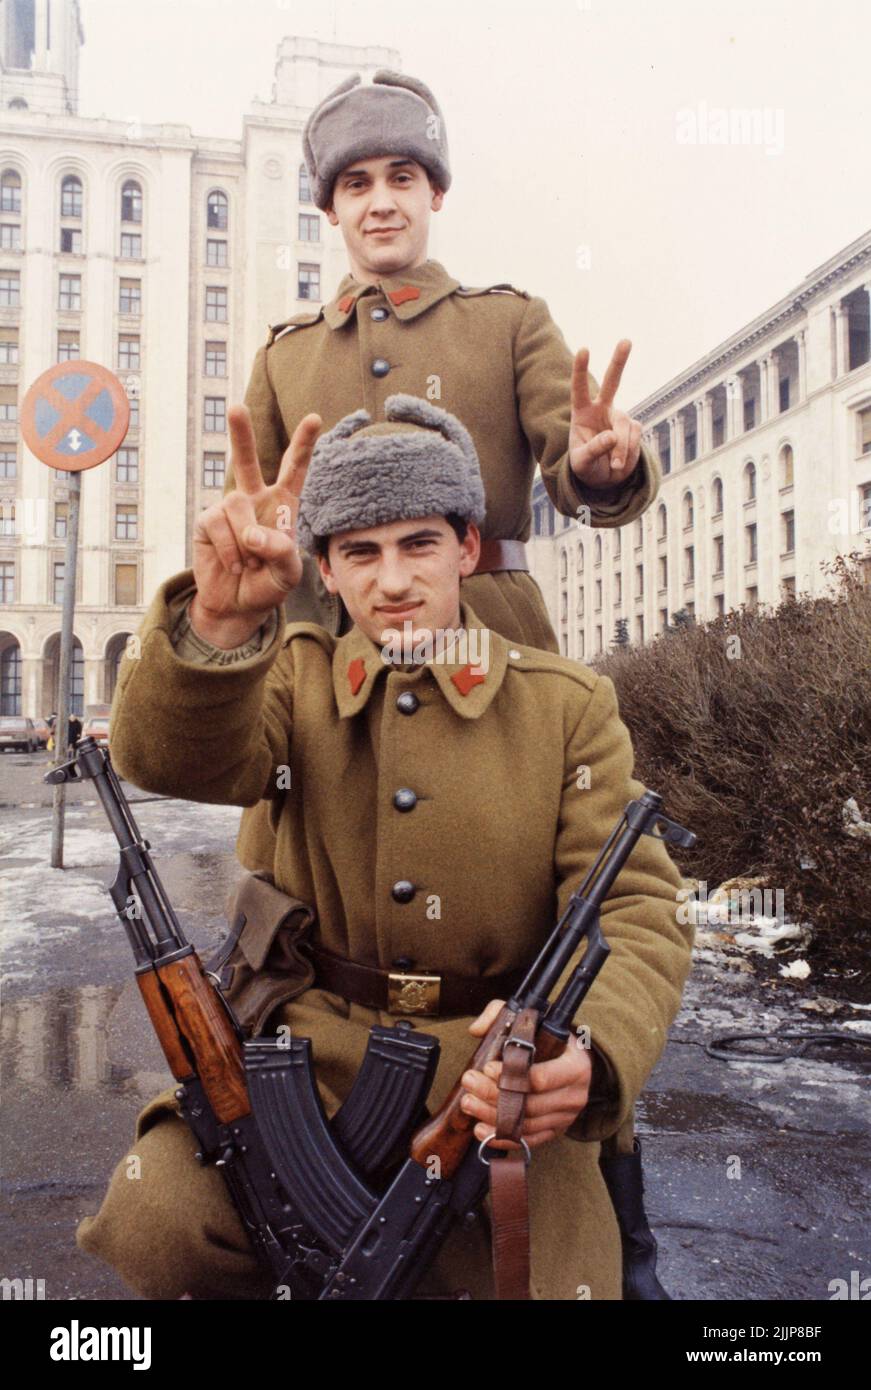 Bucharest, Romania, January 1990. Days after the Romanian Revolution, soldiers in front of 'Casa Scanteii/ Casa Presei Libere' making the victory sign. Stock Photo